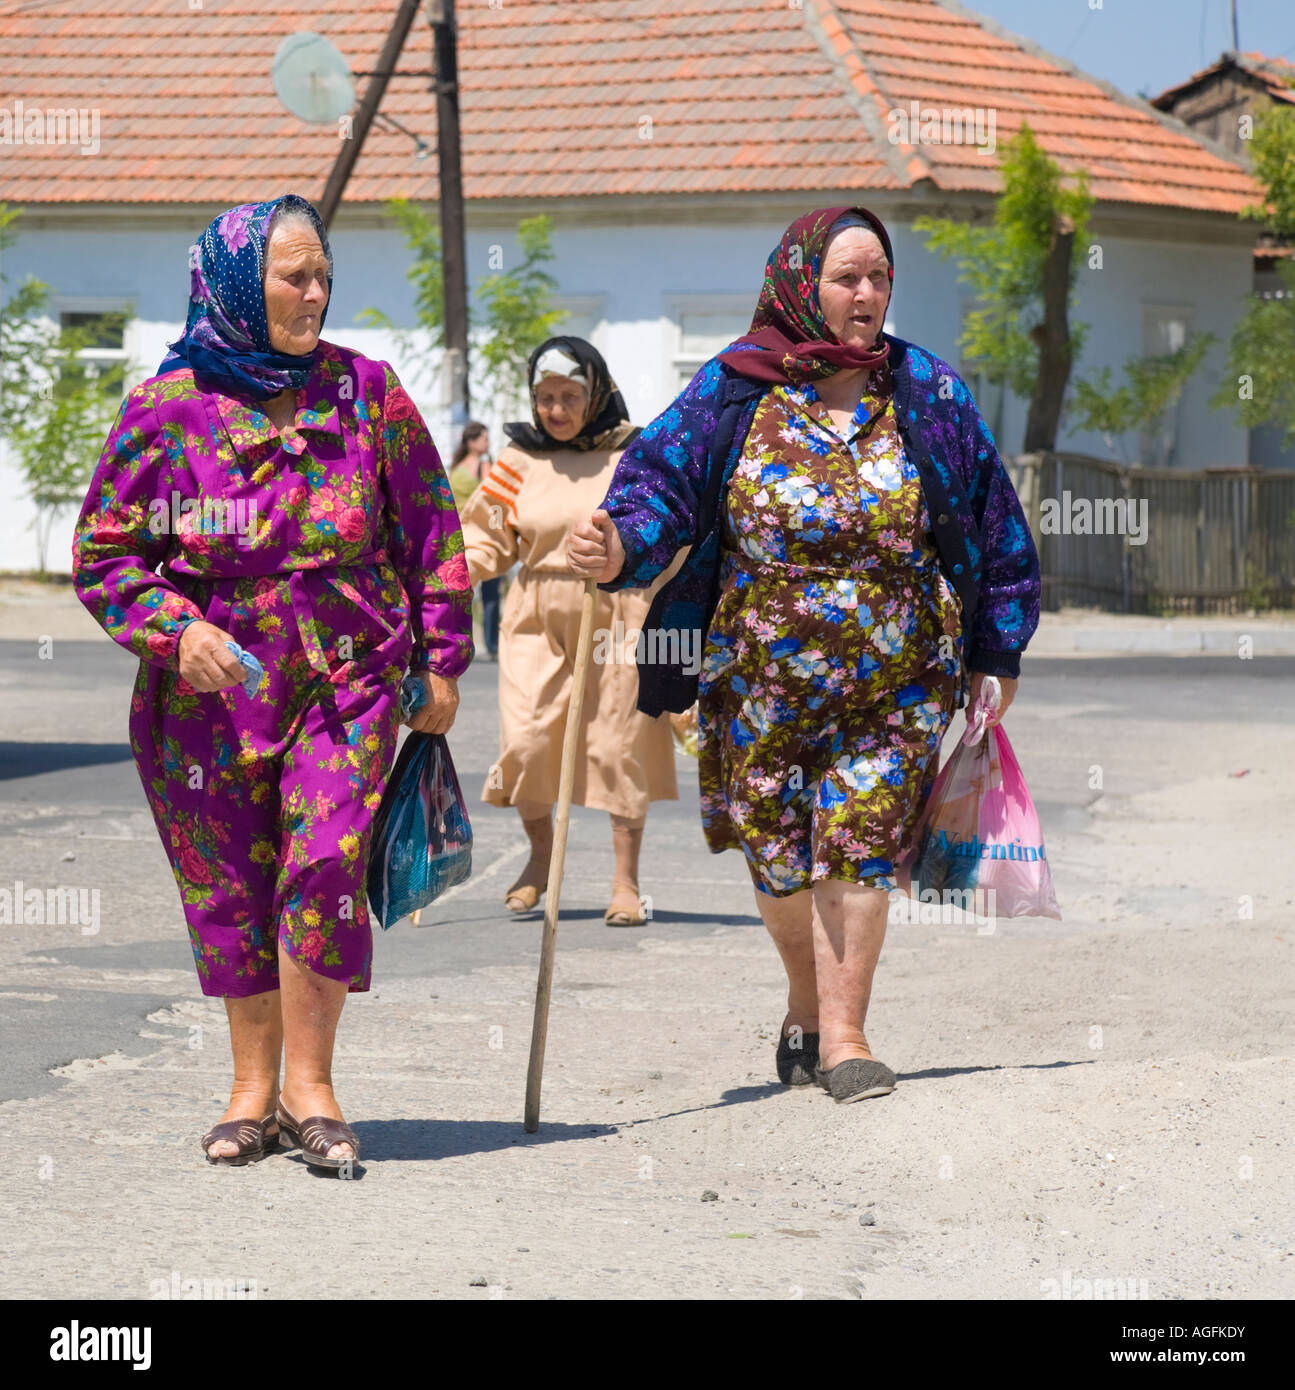 Three old women in traditional clothing crossing a street Stock Photo